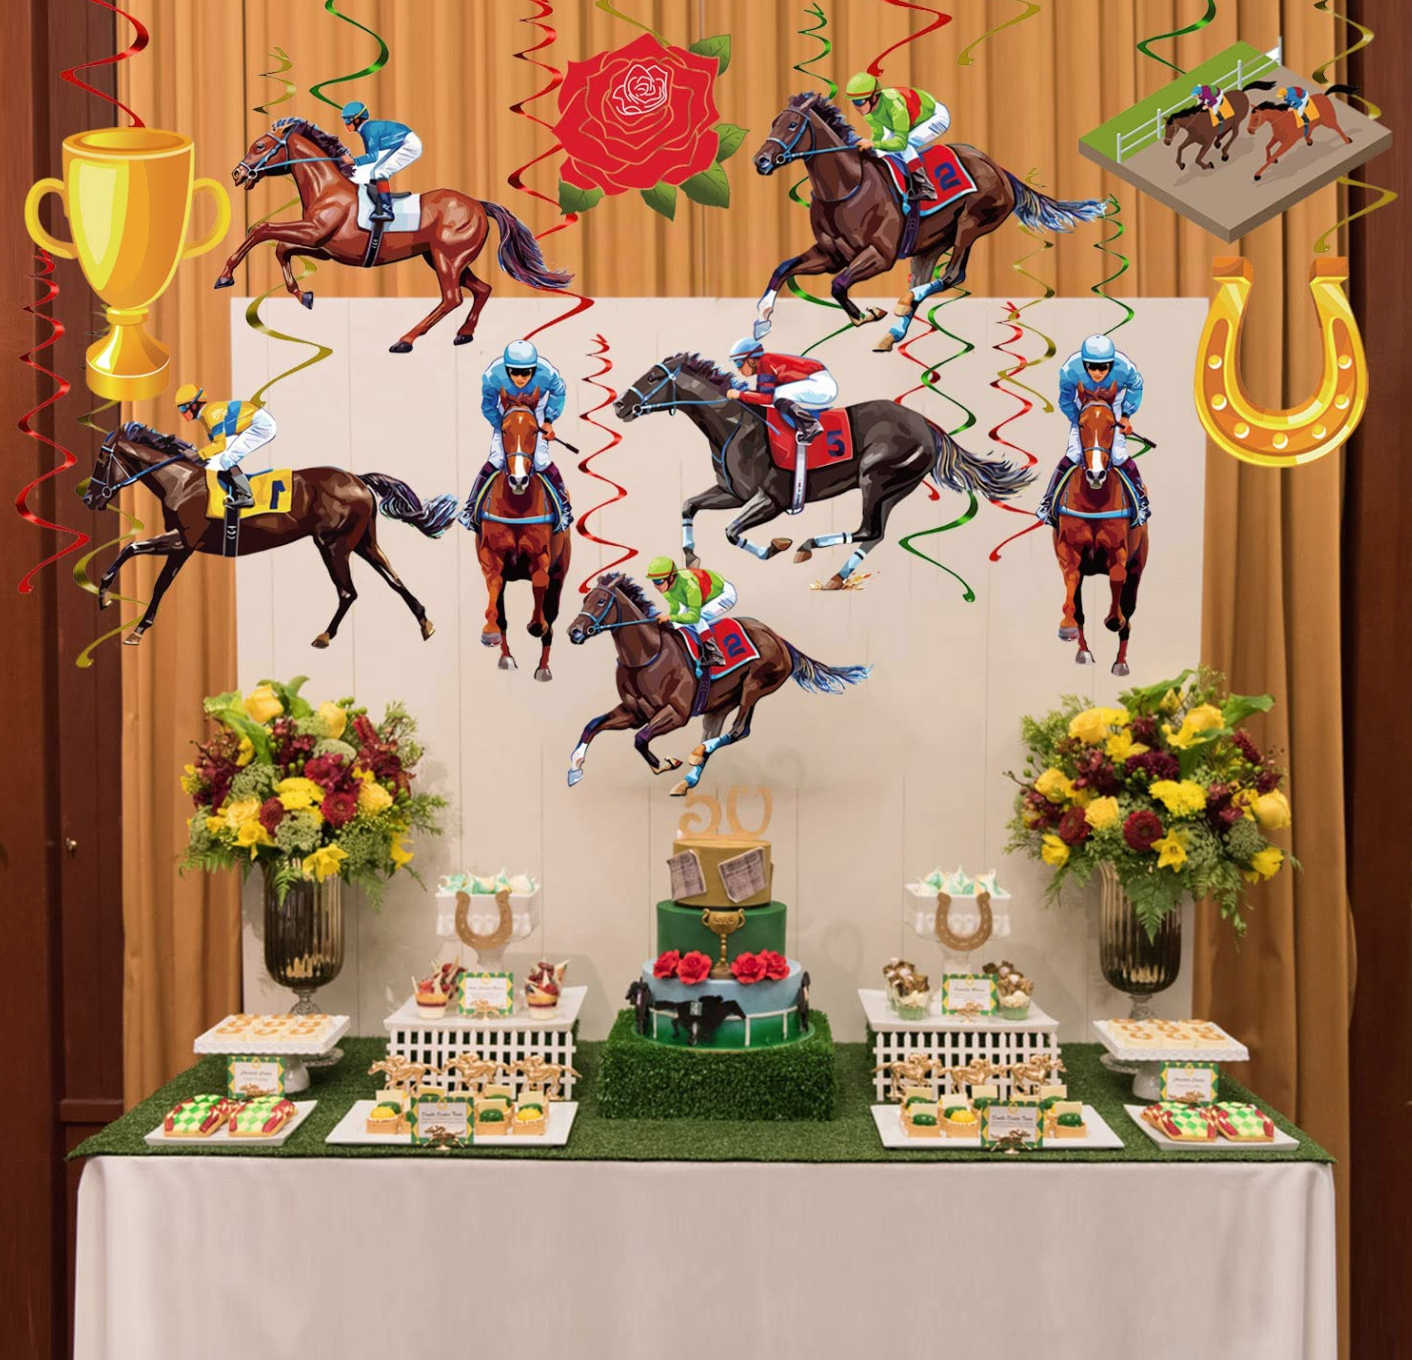 Off to the Races Kentucky Derby Banner, Horse Racing Decorations